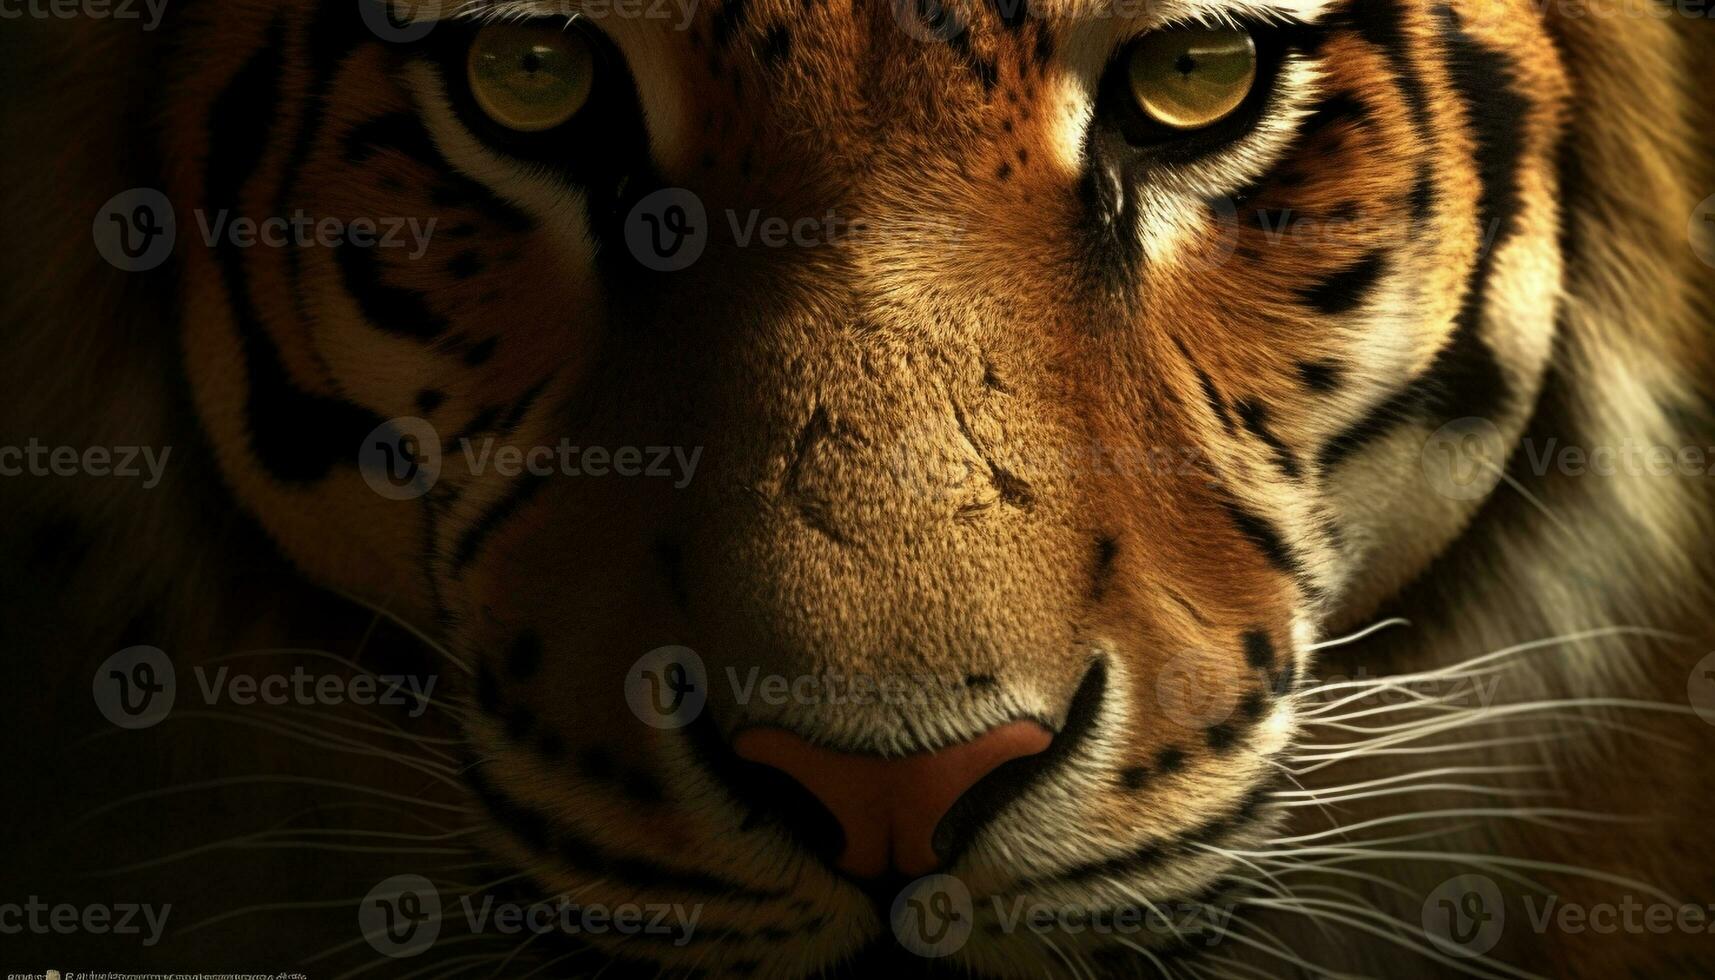 Close up portrait of majestic Bengal tiger staring with aggression generated by AI photo